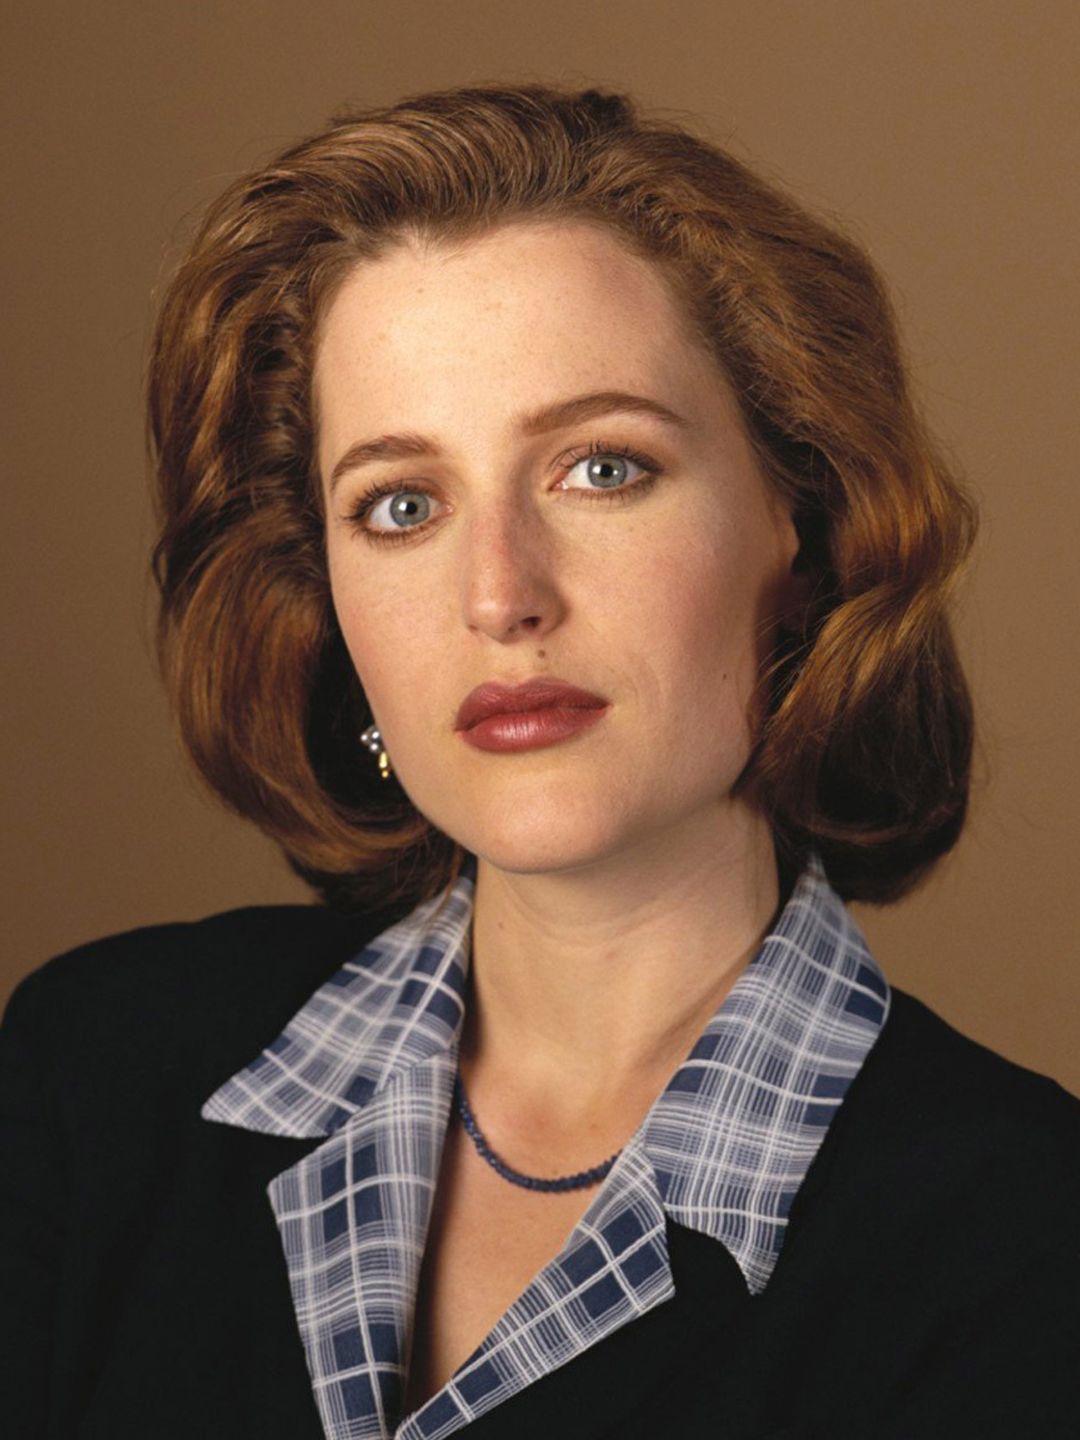 Gillian Anderson unphotoshopped pictures